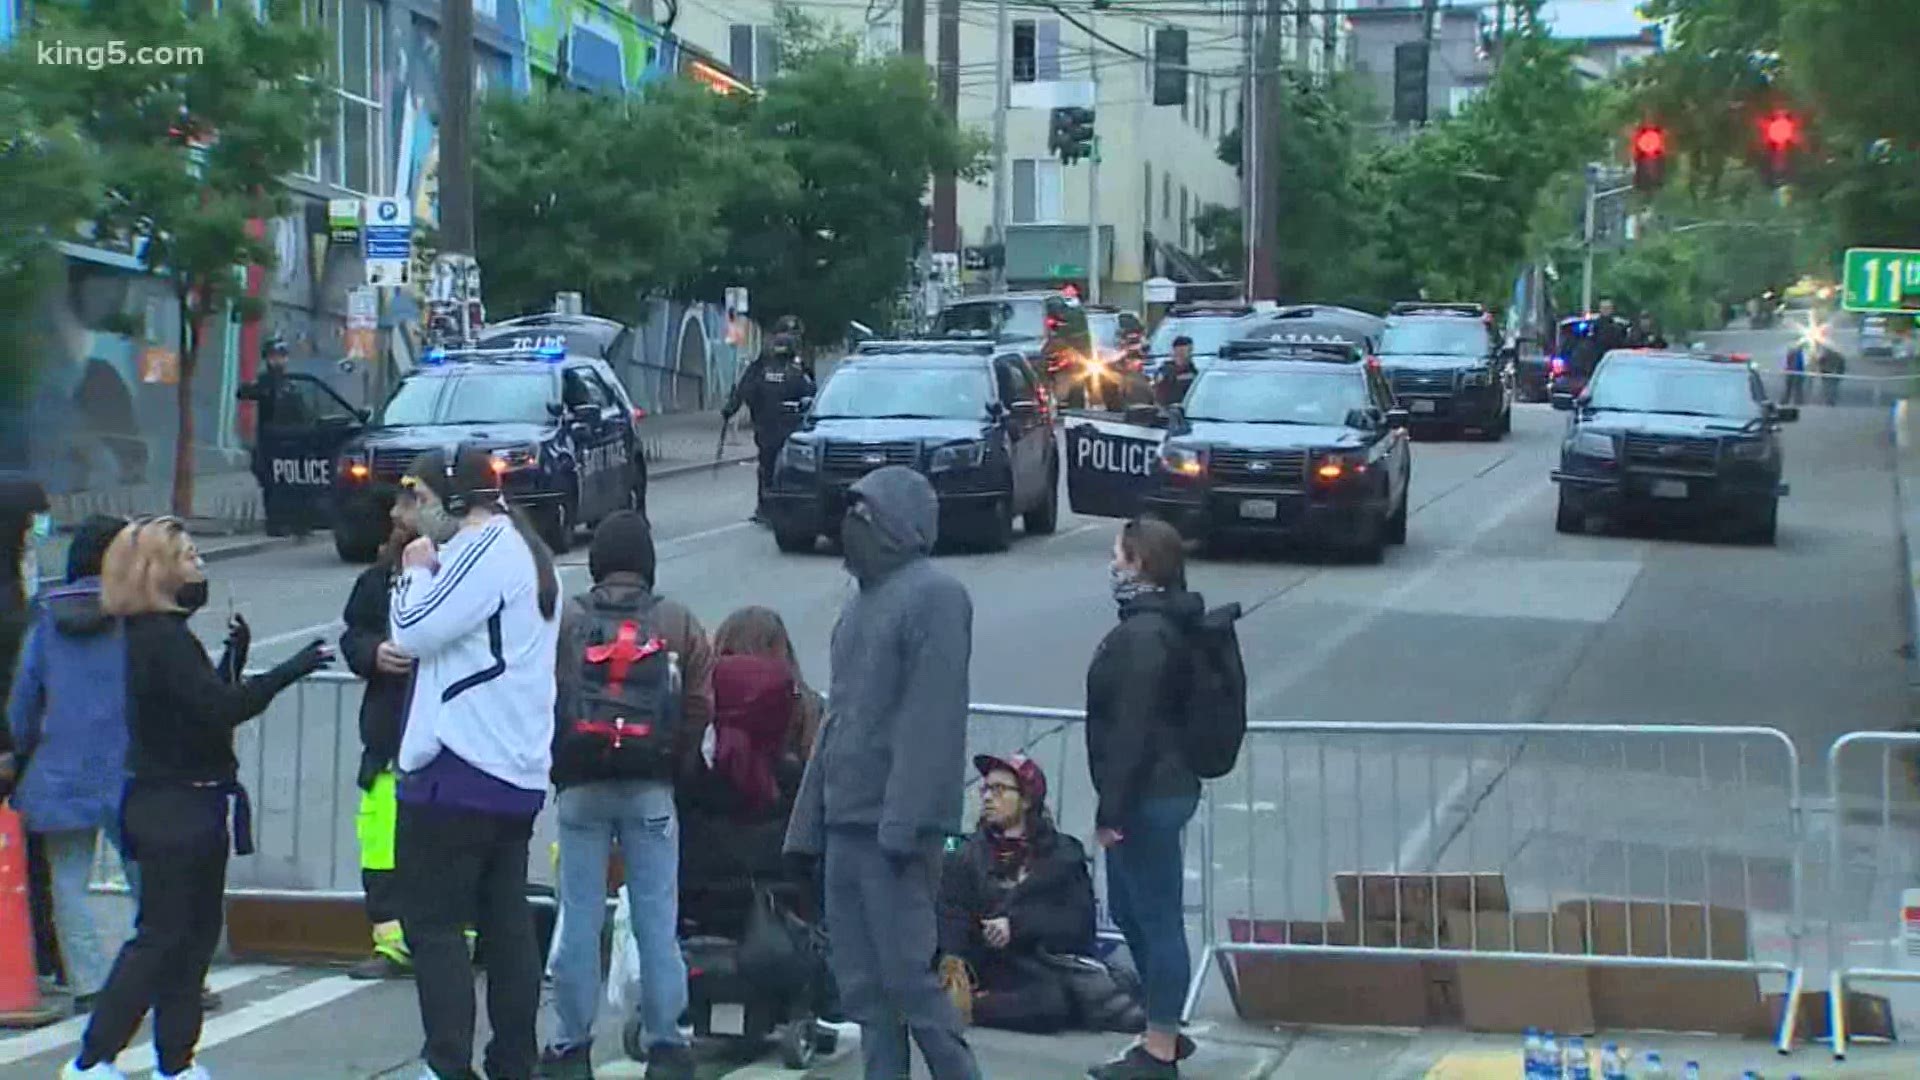 Seattle's Capital Hill neighborhood had a group of peaceful protesters overnight on into Thursday morning. Police and National Guardsmen were present.